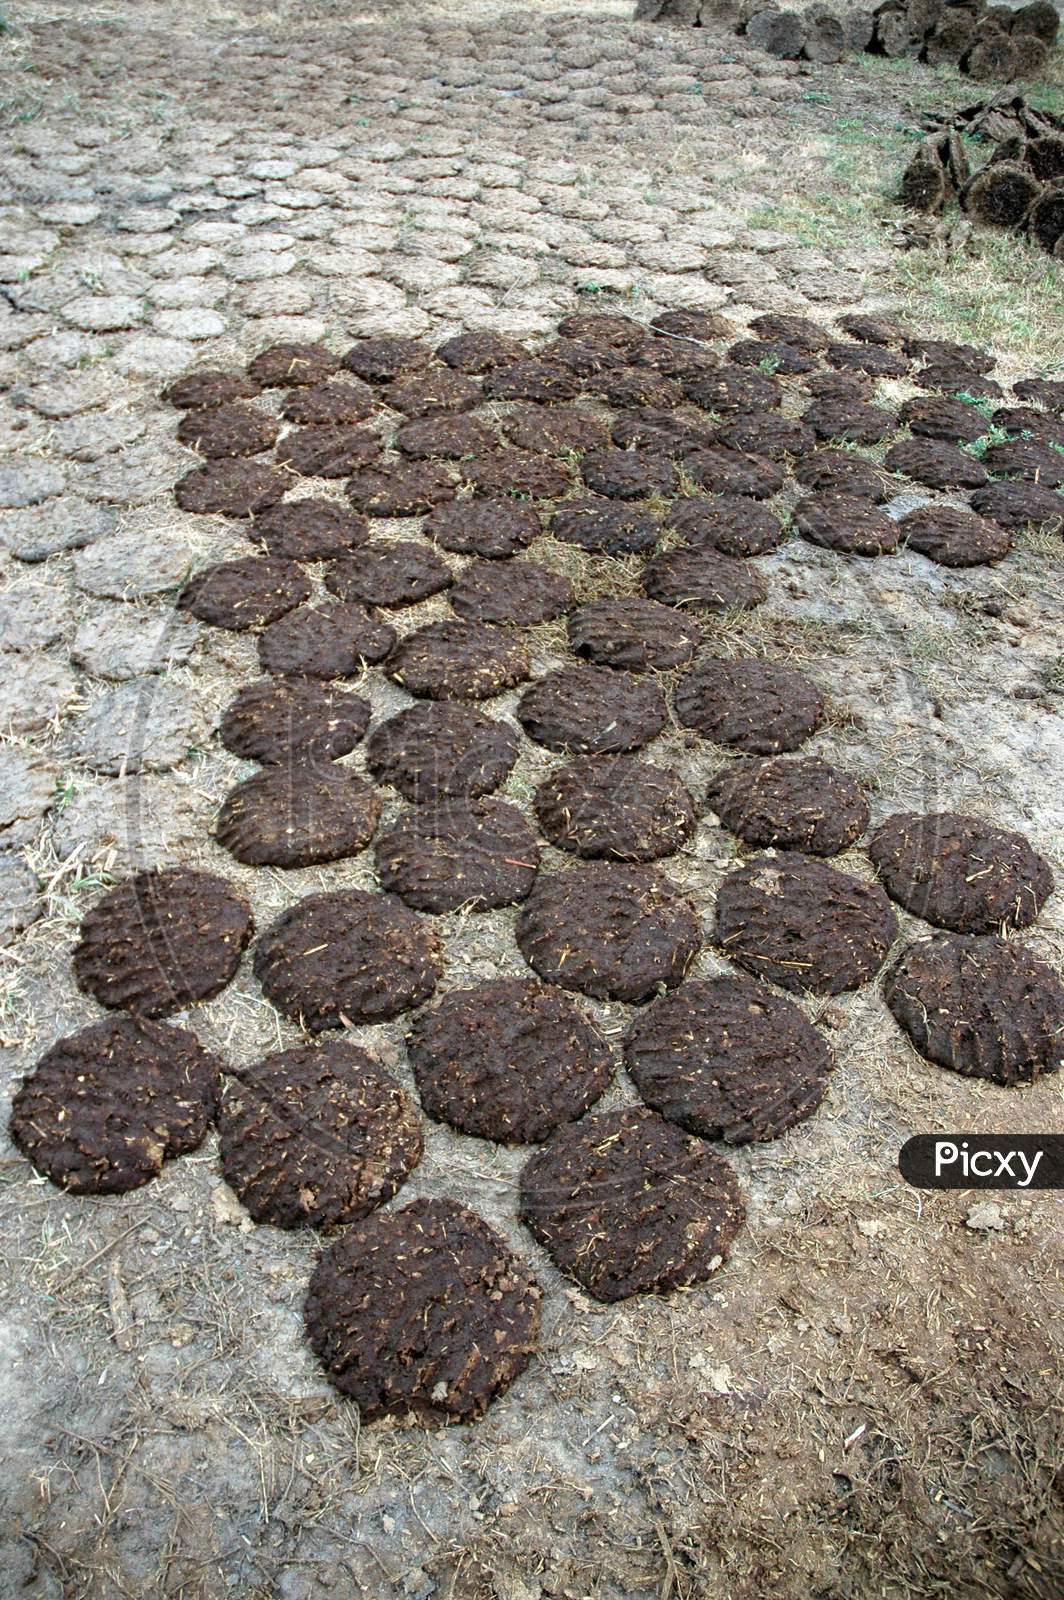 Making Cow Dung Cakes